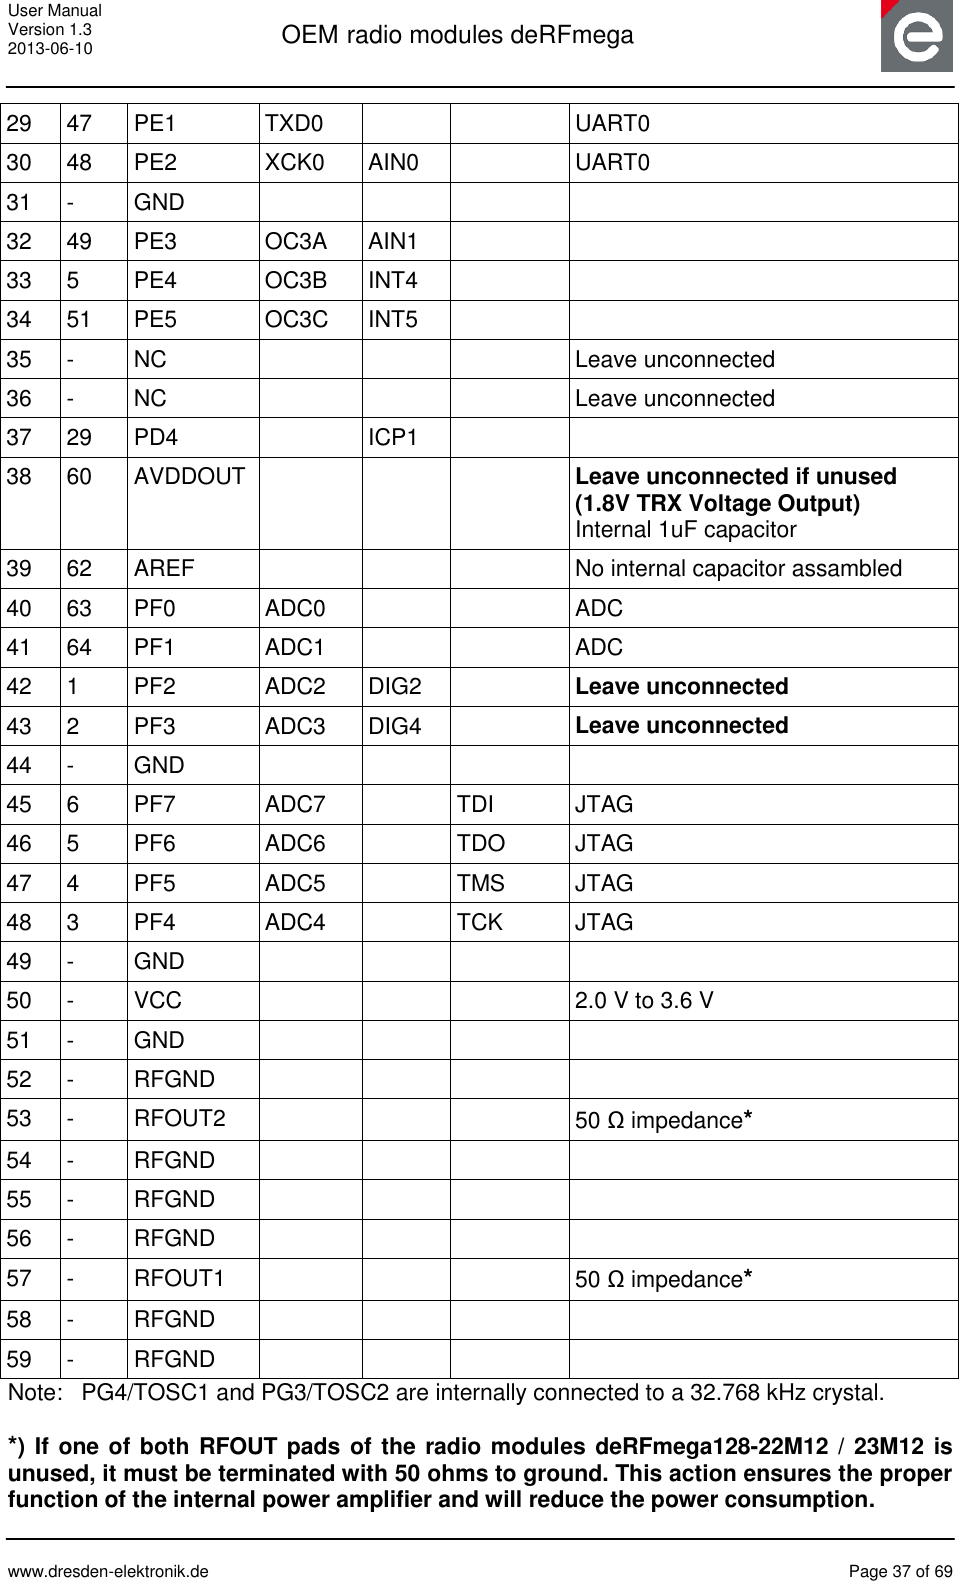 User Manual Version 1.3 2013-06-10  OEM radio modules deRFmega      www.dresden-elektronik.de  Page 37 of 69  29 47 PE1 TXD0   UART0 30 48 PE2 XCK0 AIN0  UART0 31 - GND     32 49 PE3 OC3A AIN1   33 5 PE4 OC3B INT4   34 51 PE5 OC3C INT5   35 - NC    Leave unconnected 36 - NC    Leave unconnected 37 29 PD4  ICP1   38 60 AVDDOUT    Leave unconnected if unused (1.8V TRX Voltage Output) Internal 1uF capacitor 39 62 AREF    No internal capacitor assambled 40 63 PF0 ADC0   ADC 41 64 PF1 ADC1   ADC 42 1 PF2 ADC2 DIG2  Leave unconnected 43 2 PF3 ADC3 DIG4  Leave unconnected 44 - GND     45 6 PF7 ADC7  TDI JTAG 46 5 PF6 ADC6  TDO JTAG 47 4 PF5 ADC5  TMS JTAG 48 3 PF4 ADC4  TCK JTAG 49 - GND     50 - VCC    2.0 V to 3.6 V 51 - GND     52 - RFGND      53 - RFOUT2    50 Ω impedance* 54 - RFGND     55 - RFGND     56 - RFGND      57 - RFOUT1    50 Ω impedance* 58 - RFGND     59 - RFGND     Note:   PG4/TOSC1 and PG3/TOSC2 are internally connected to a 32.768 kHz crystal.  *) If one of both RFOUT pads of the radio modules deRFmega128-22M12 / 23M12 is unused, it must be terminated with 50 ohms to ground. This action ensures the proper function of the internal power amplifier and will reduce the power consumption. 